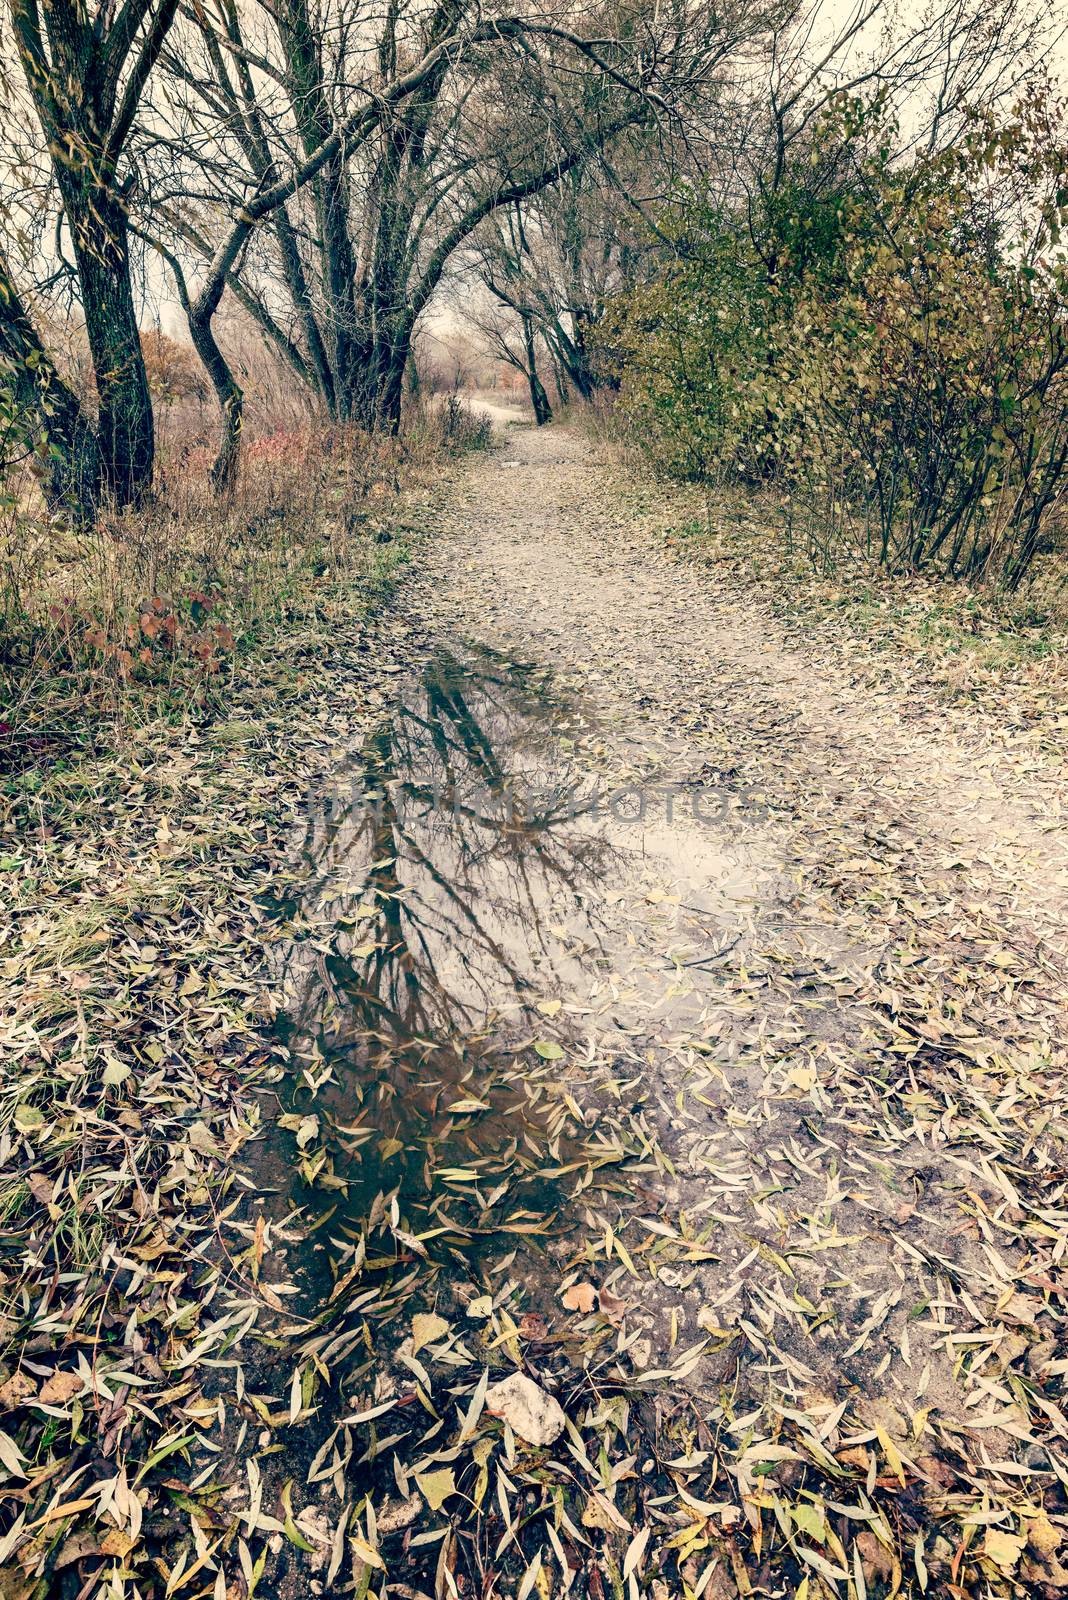 Dramatic view of a puddle with a stone after the autumn rain. Fallen willow leaves cover the ground.